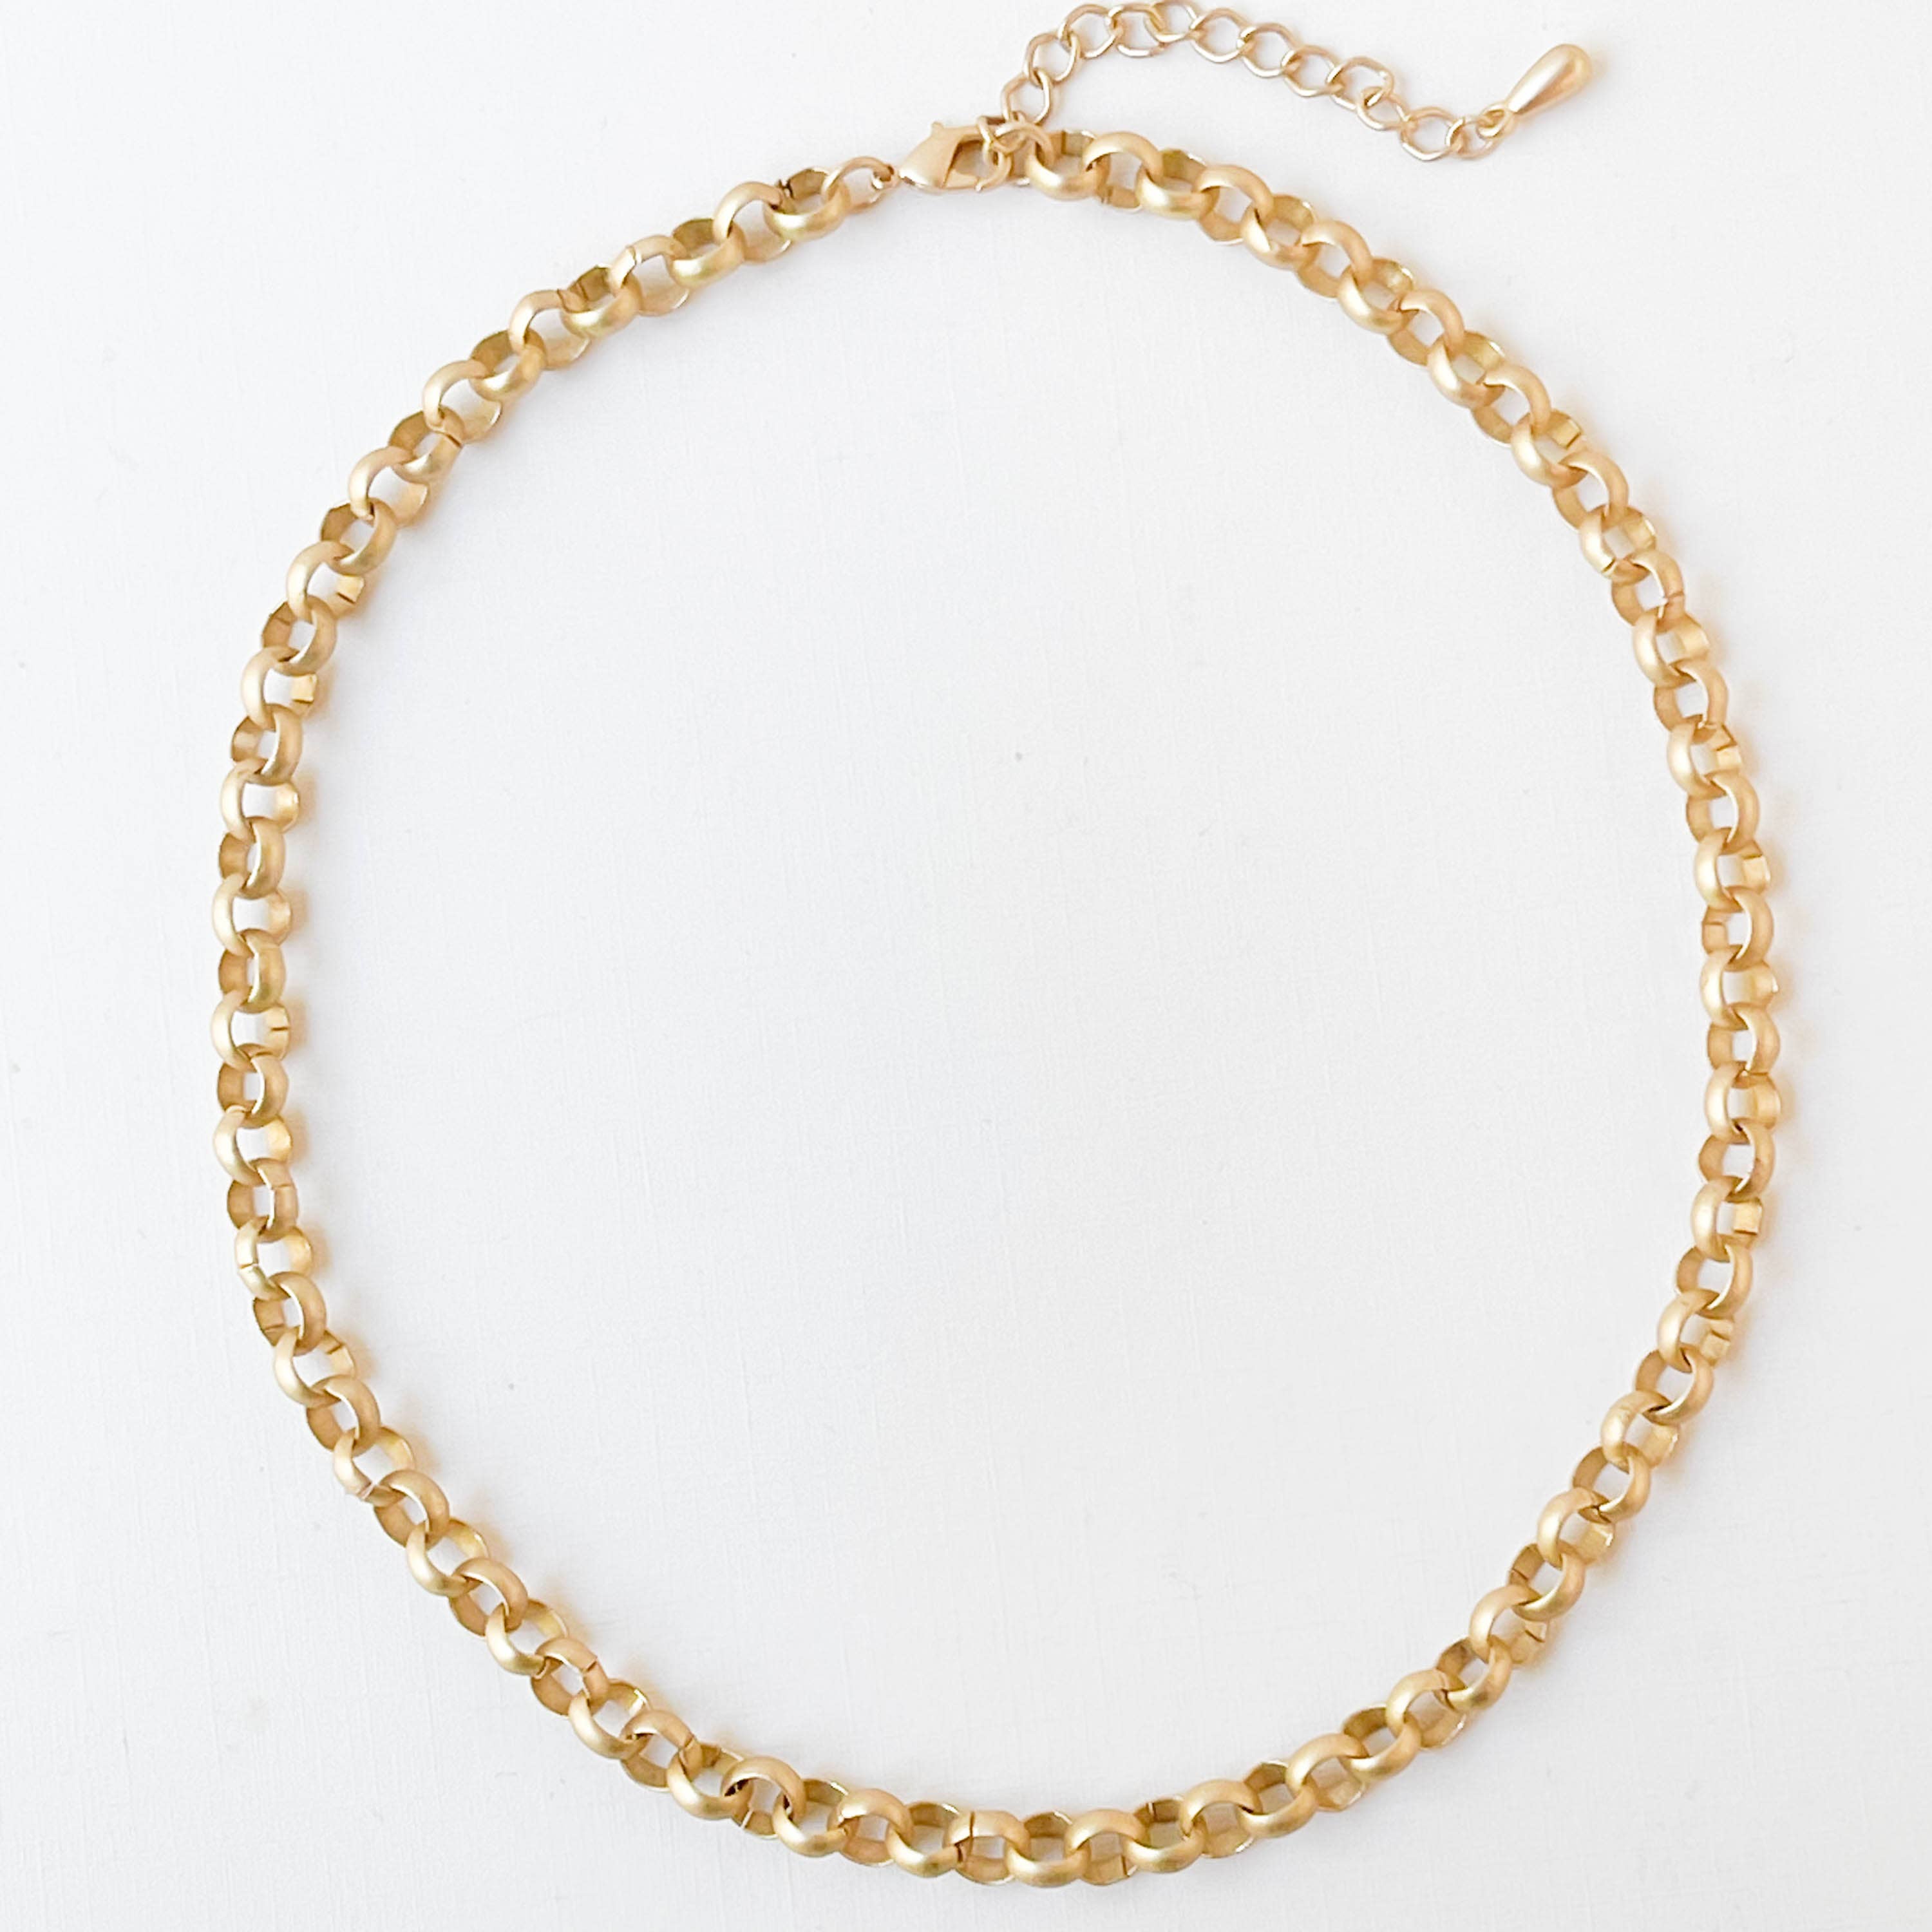 Adjustable Chunky Gold Necklace: 16